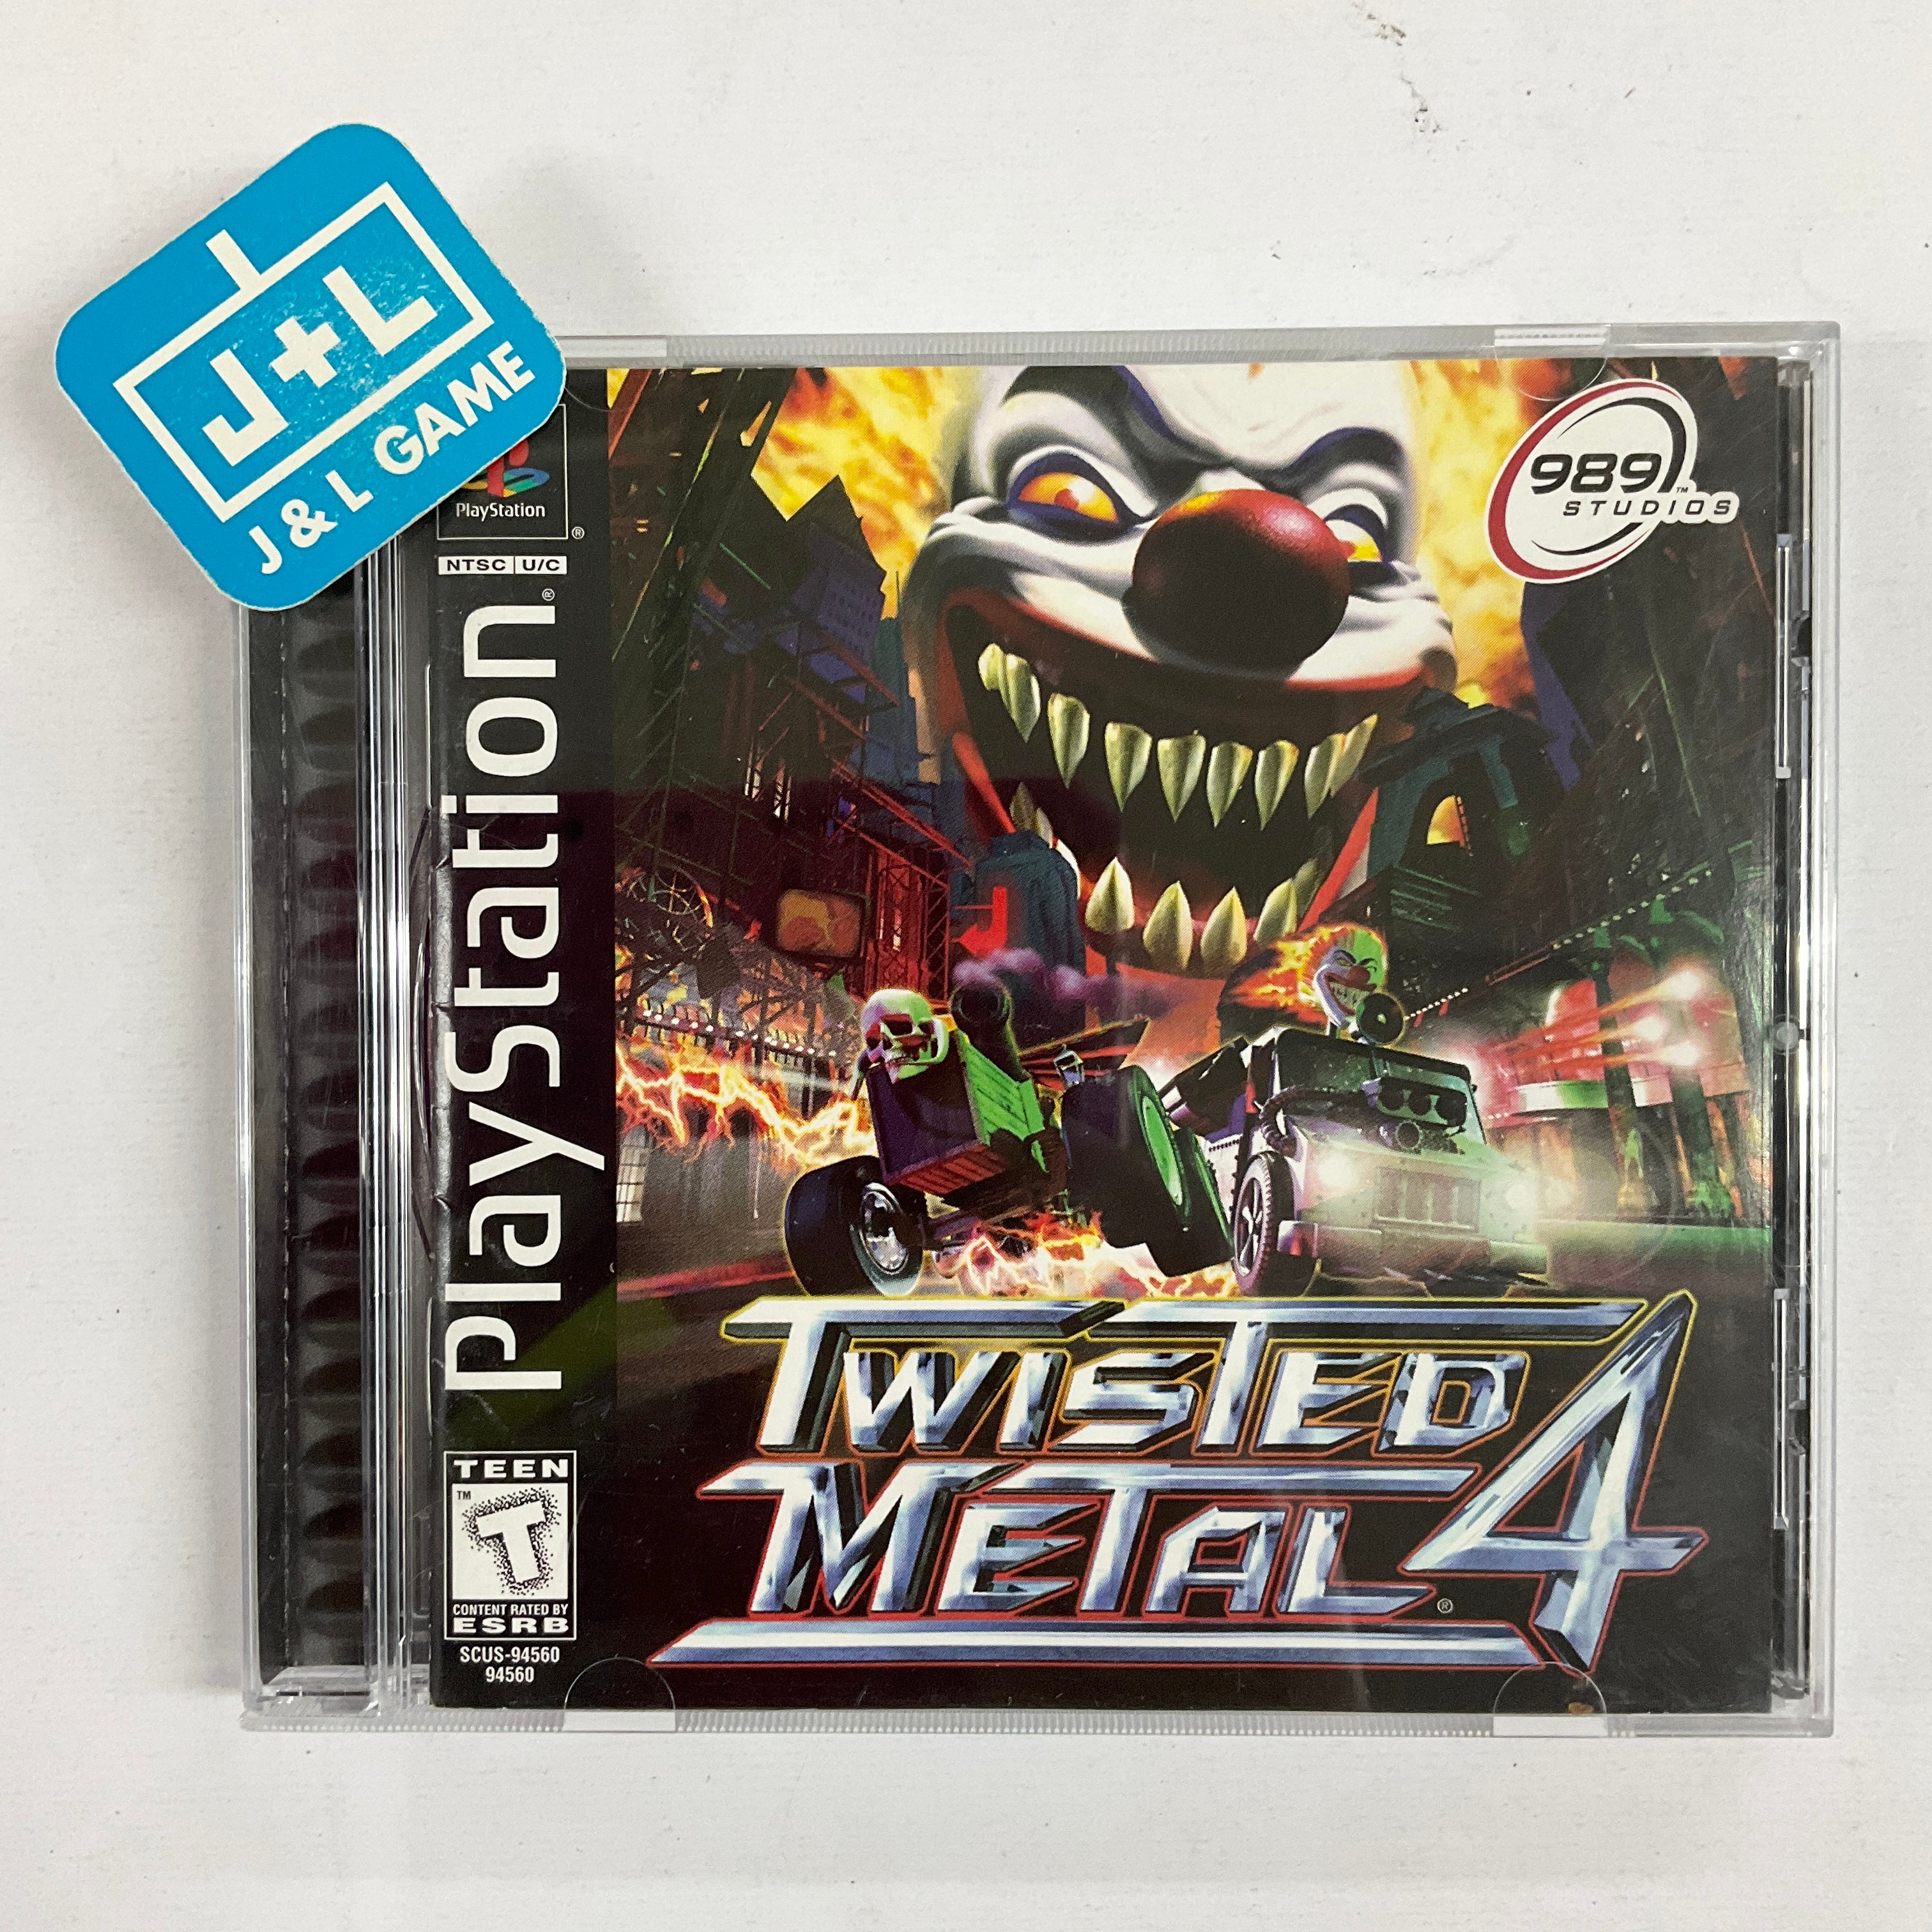 Twisted Metal 4 - (PS1) PlayStation 1 [Pre-Owned] Video Games 989 Studios   